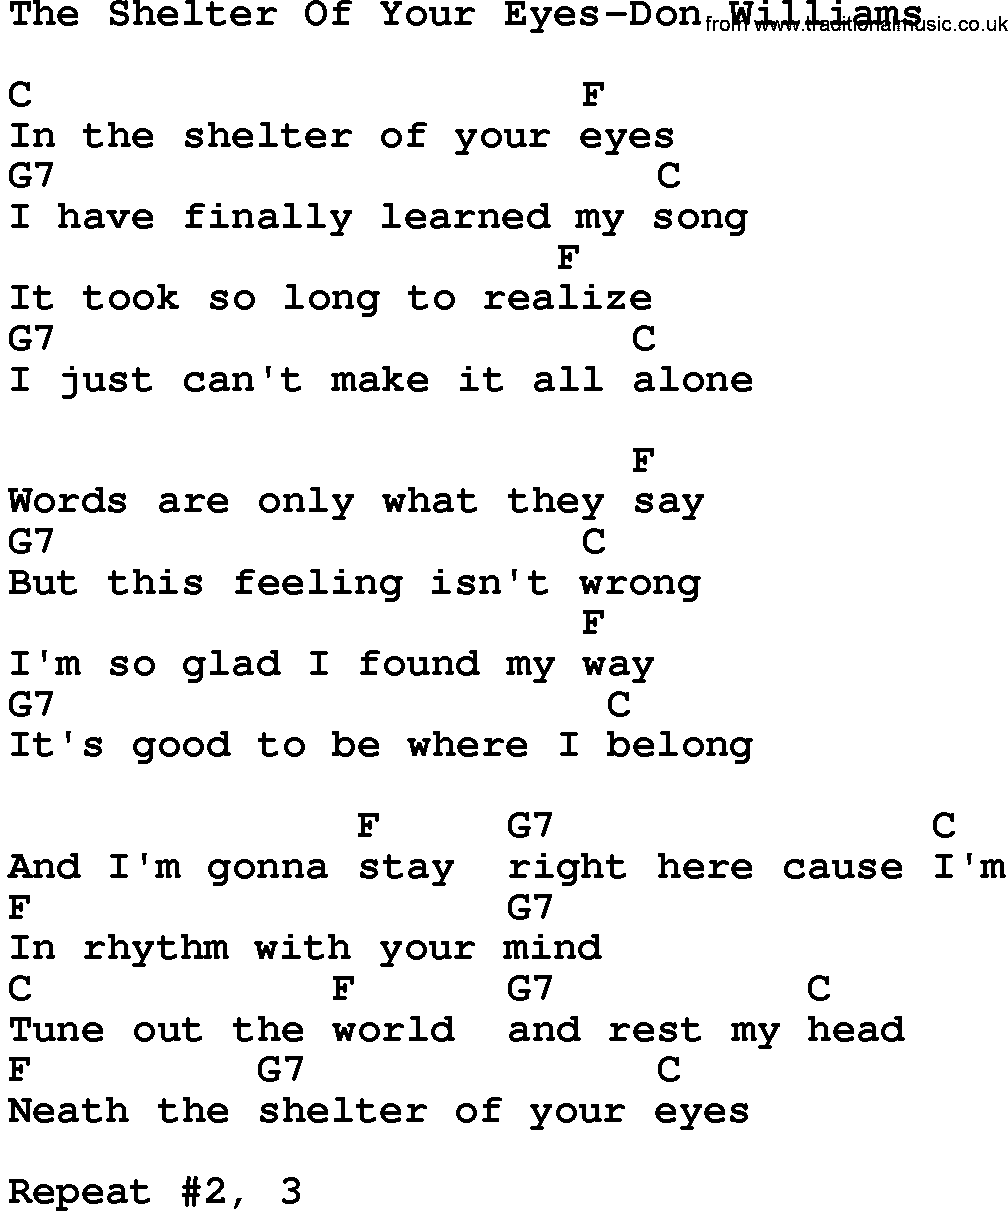 Country music song: The Shelter Of Your Eyes-Don Williams lyrics and chords